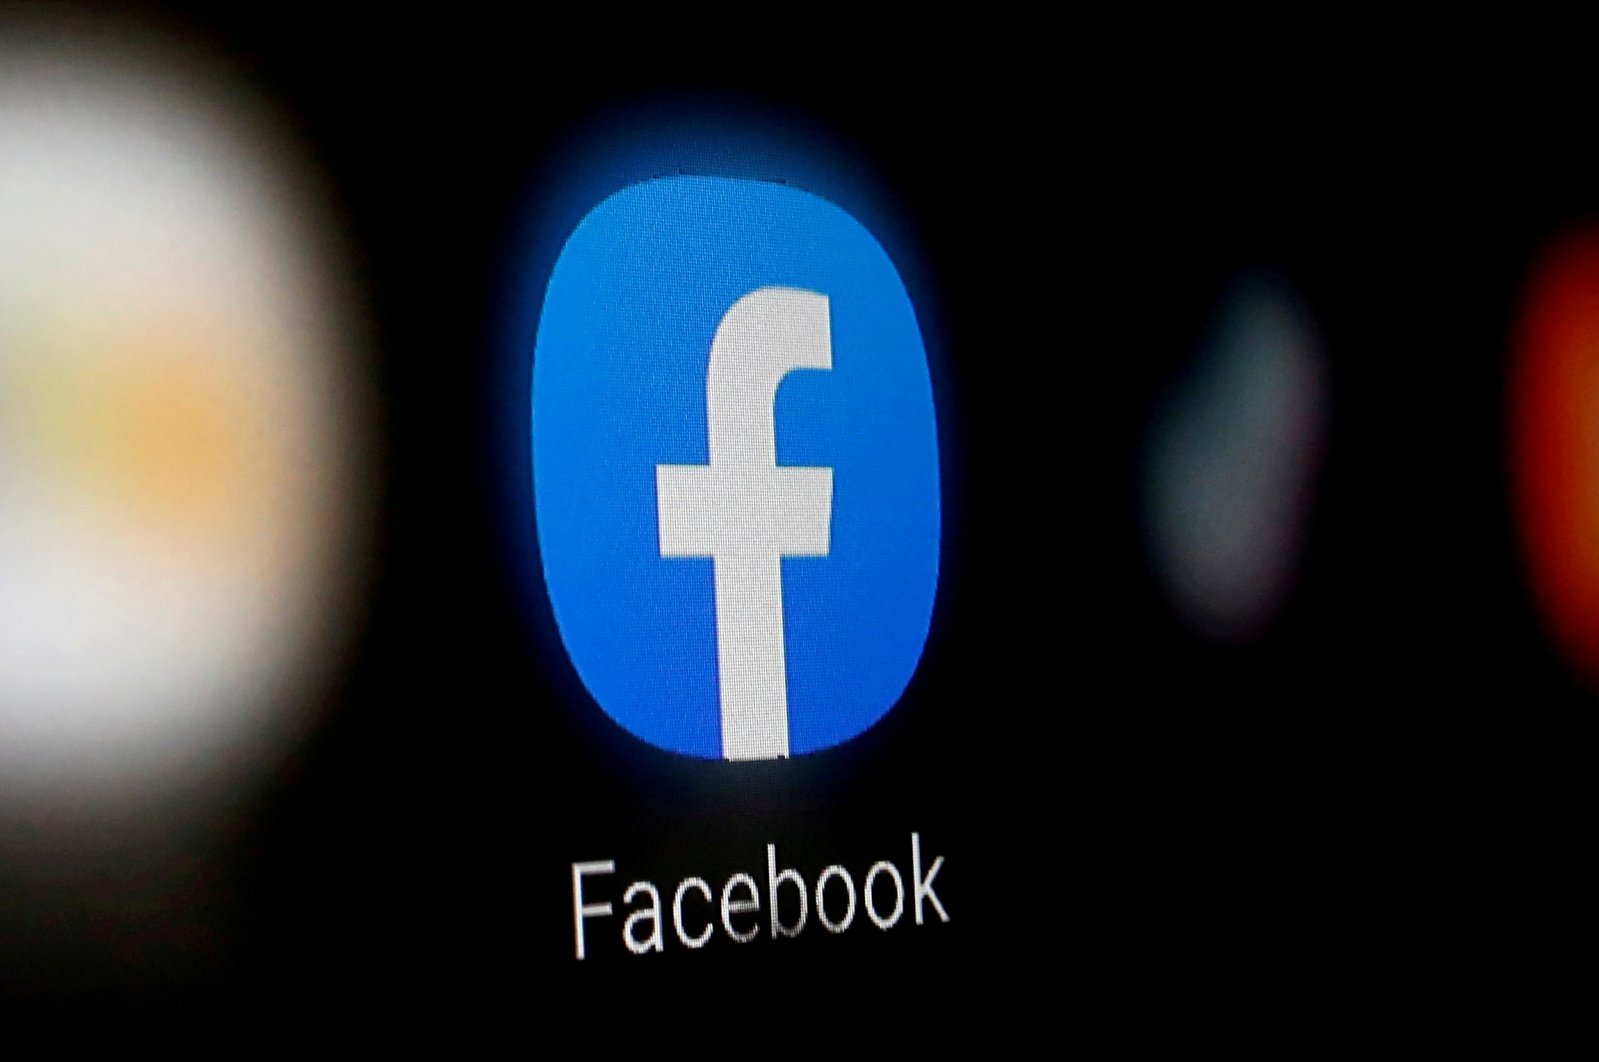 A Facebook logo is displayed on a smartphone in this illustration taken Jan. 6, 2020. (Reuters Photo)